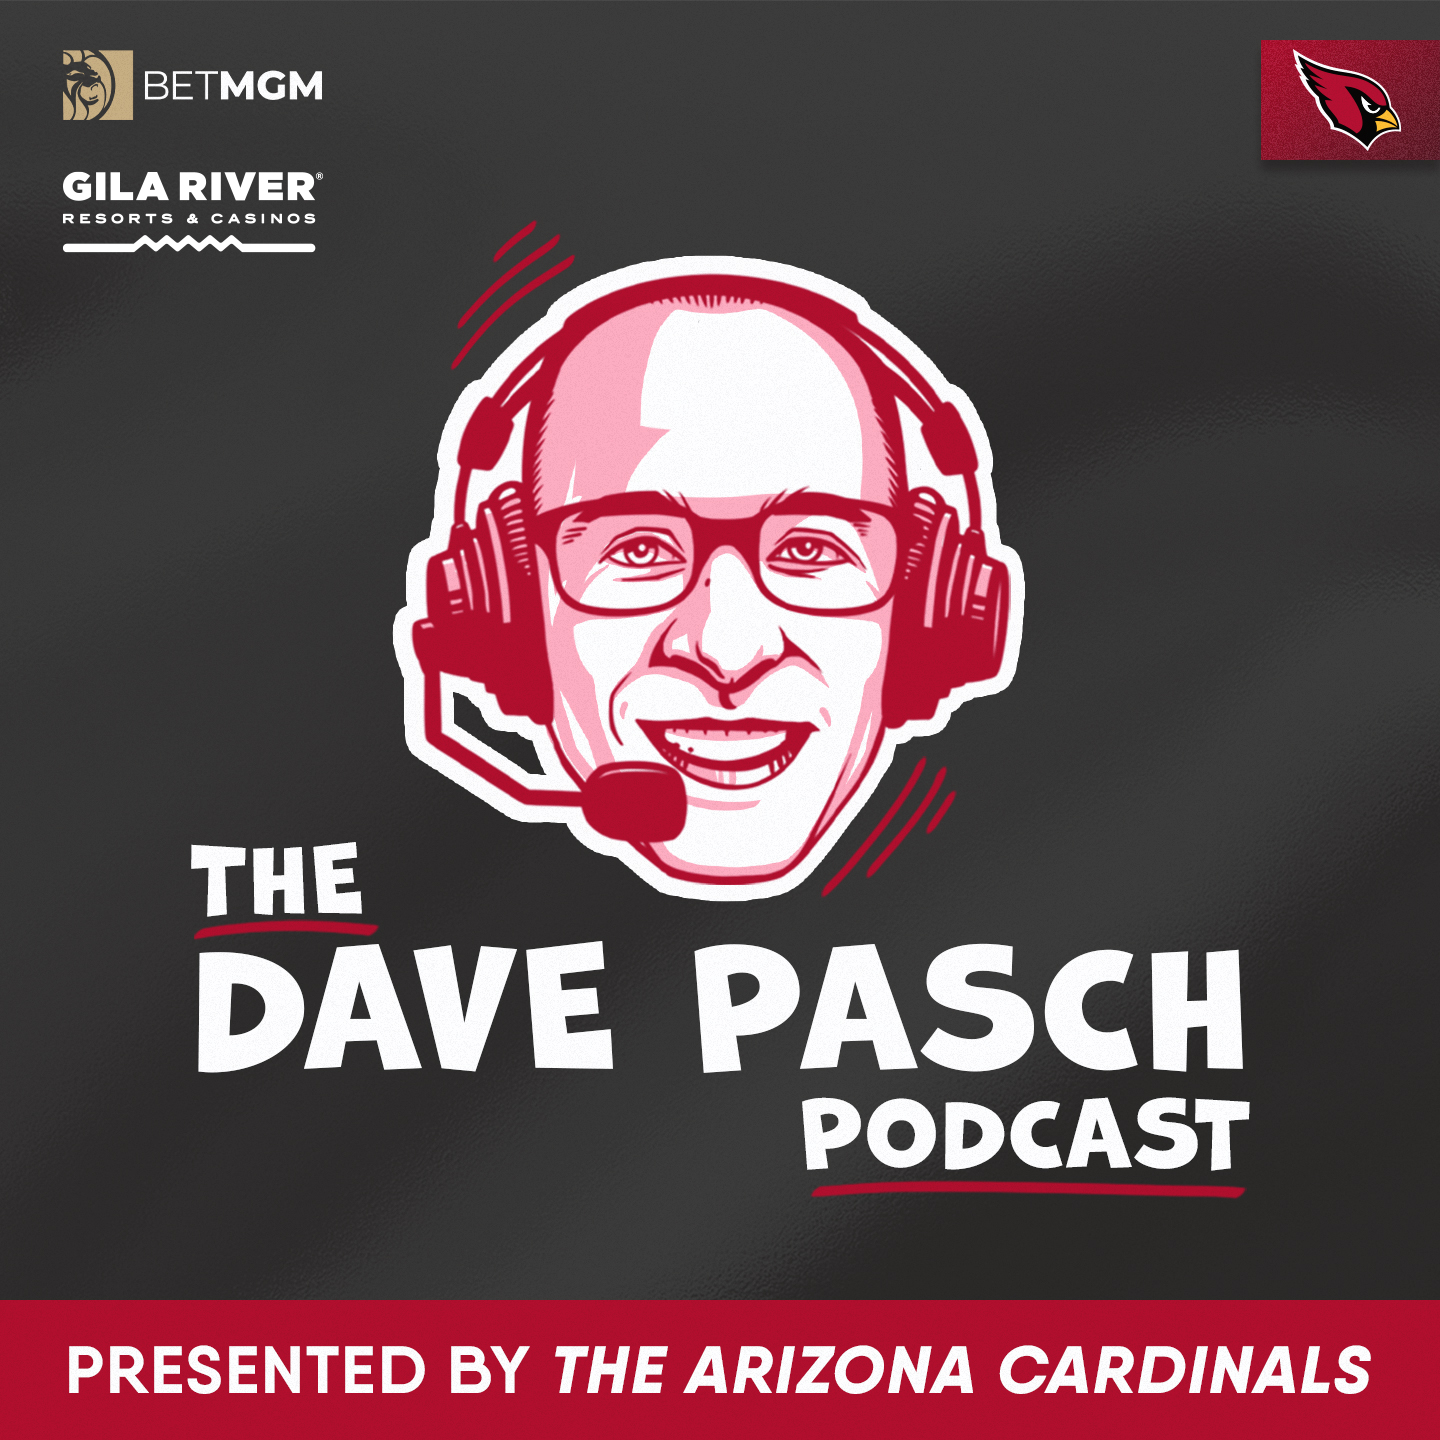 The Dave Pasch Podcast - Frank Caliendo Puts Own Spin On Arizona Cardinals Radio Calls